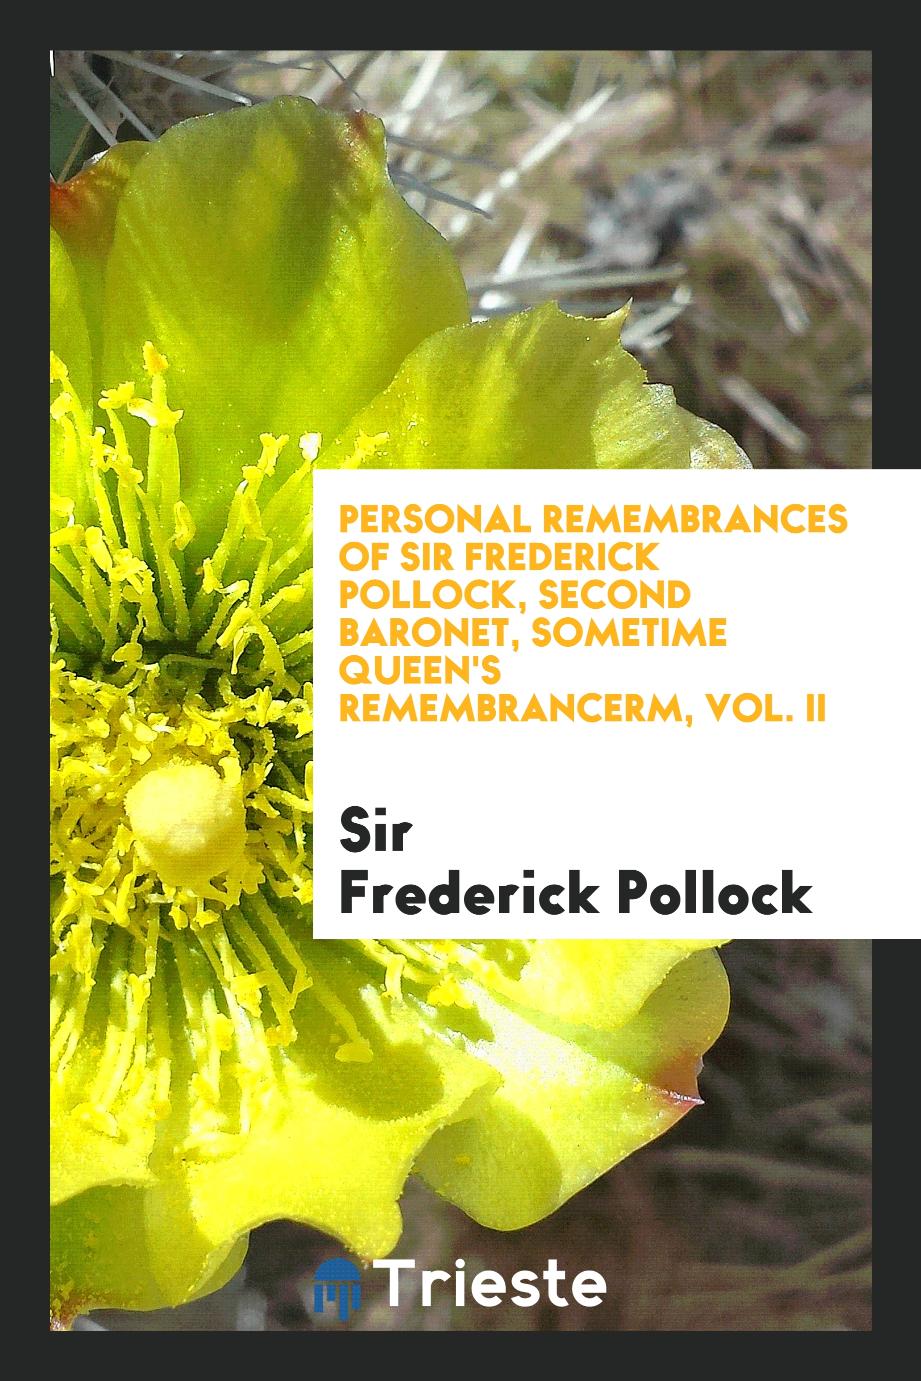 Personal remembrances of Sir Frederick Pollock, second baronet, sometime queen's remembrancerm, Vol. II